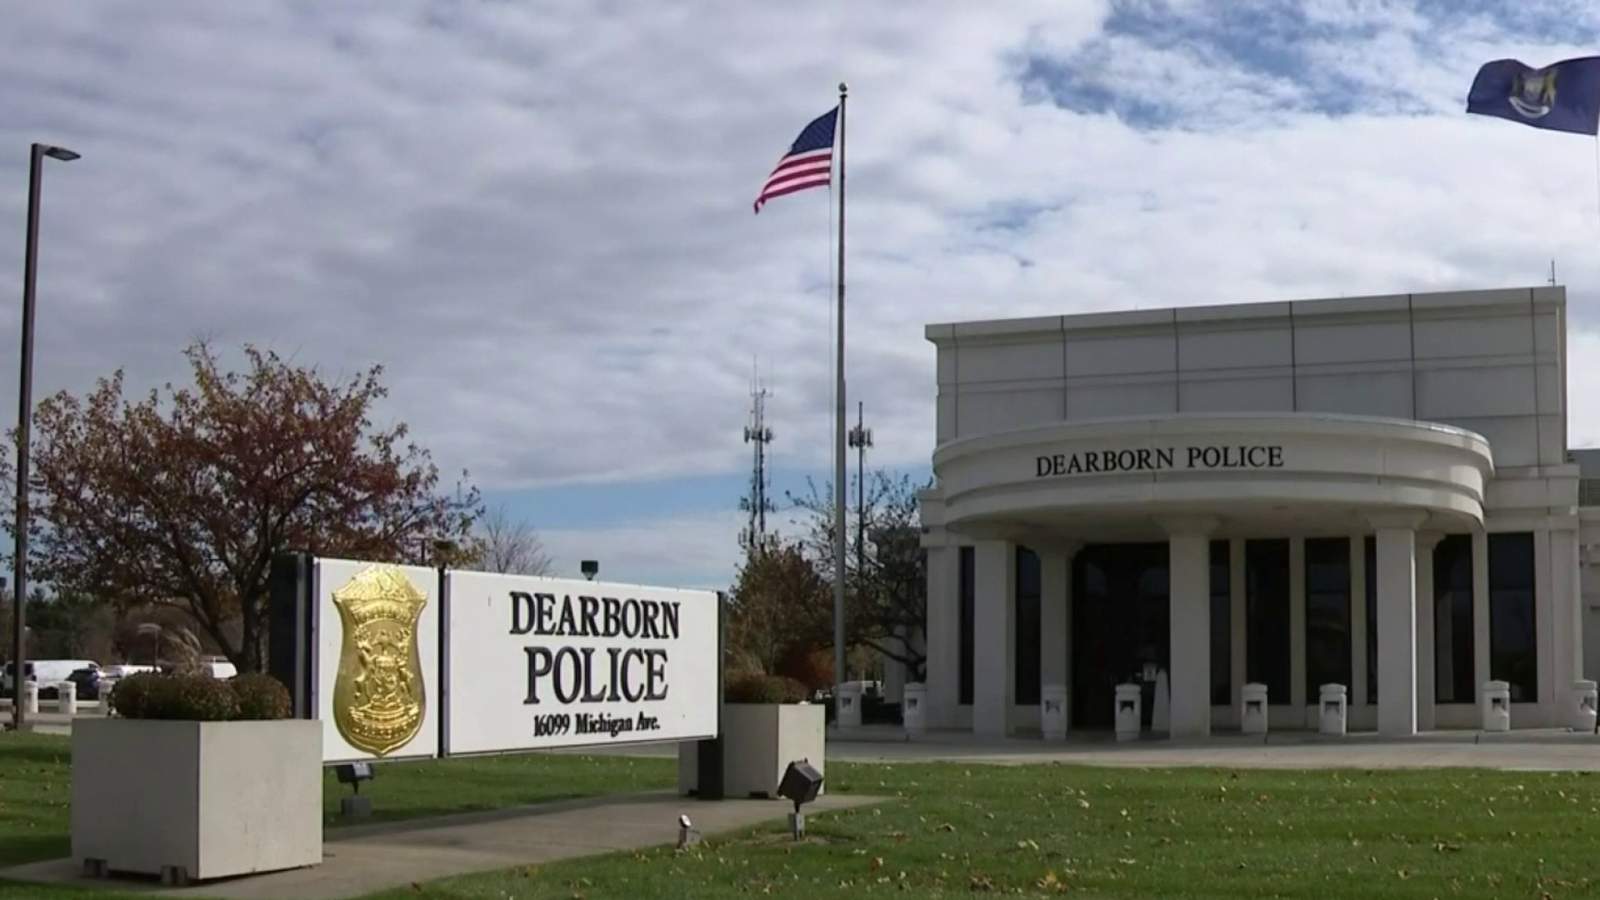 Federal lawsuit filed against city of Dearborn, police department